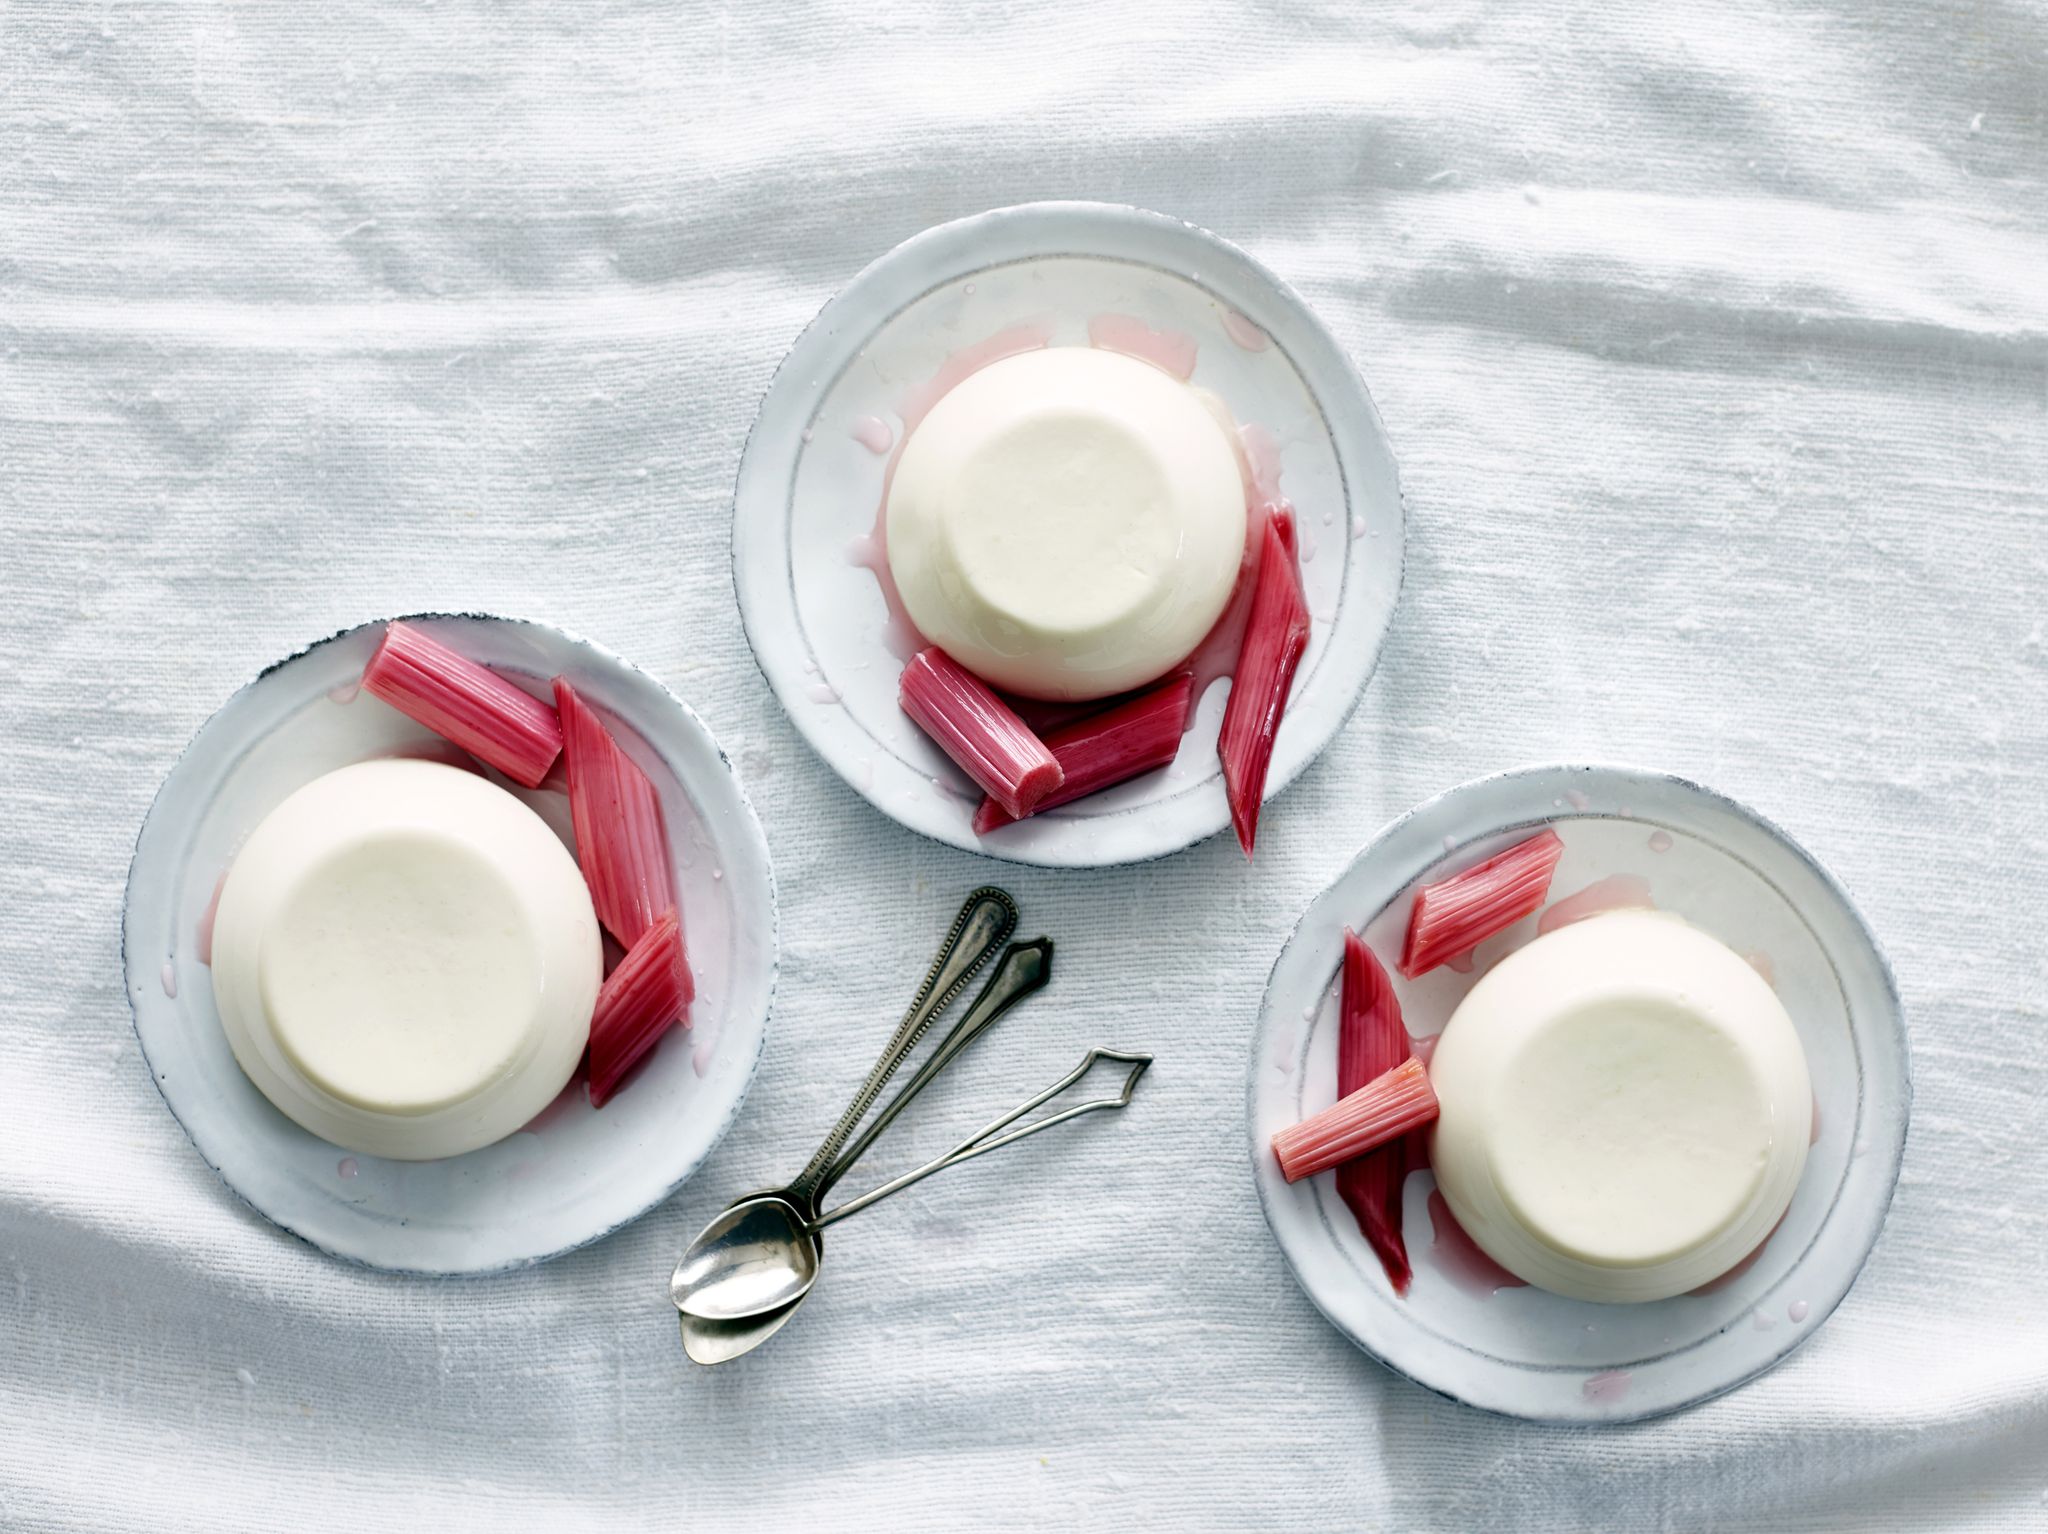 Overhead view of panna cotta desserts with rhubarb on saucers